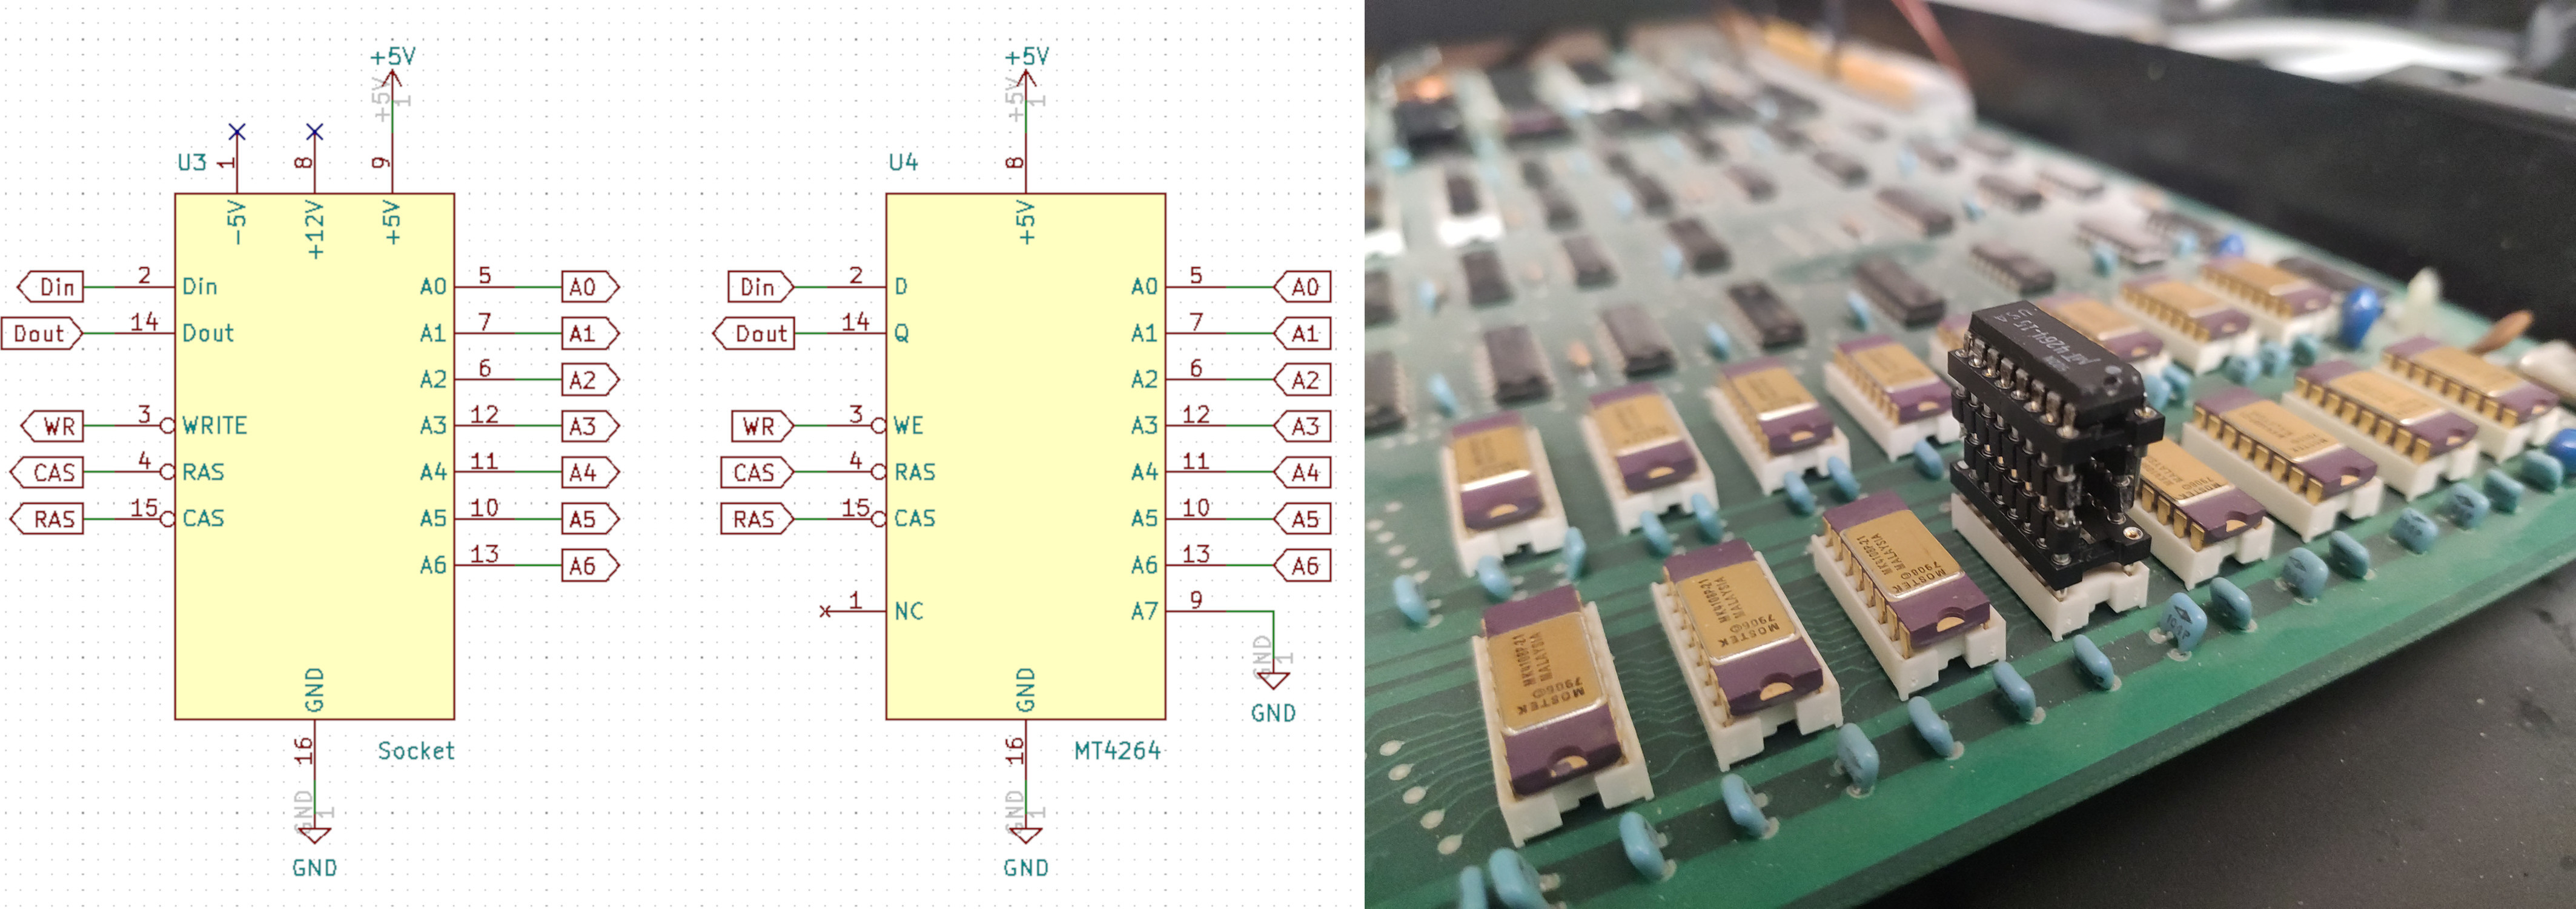 Left: The pin mapping adapter schematic for using MT4264 chips in a socket designed for MK4108/4116 DRAM. Right: The replacement memory module on its ad\
apter socket.